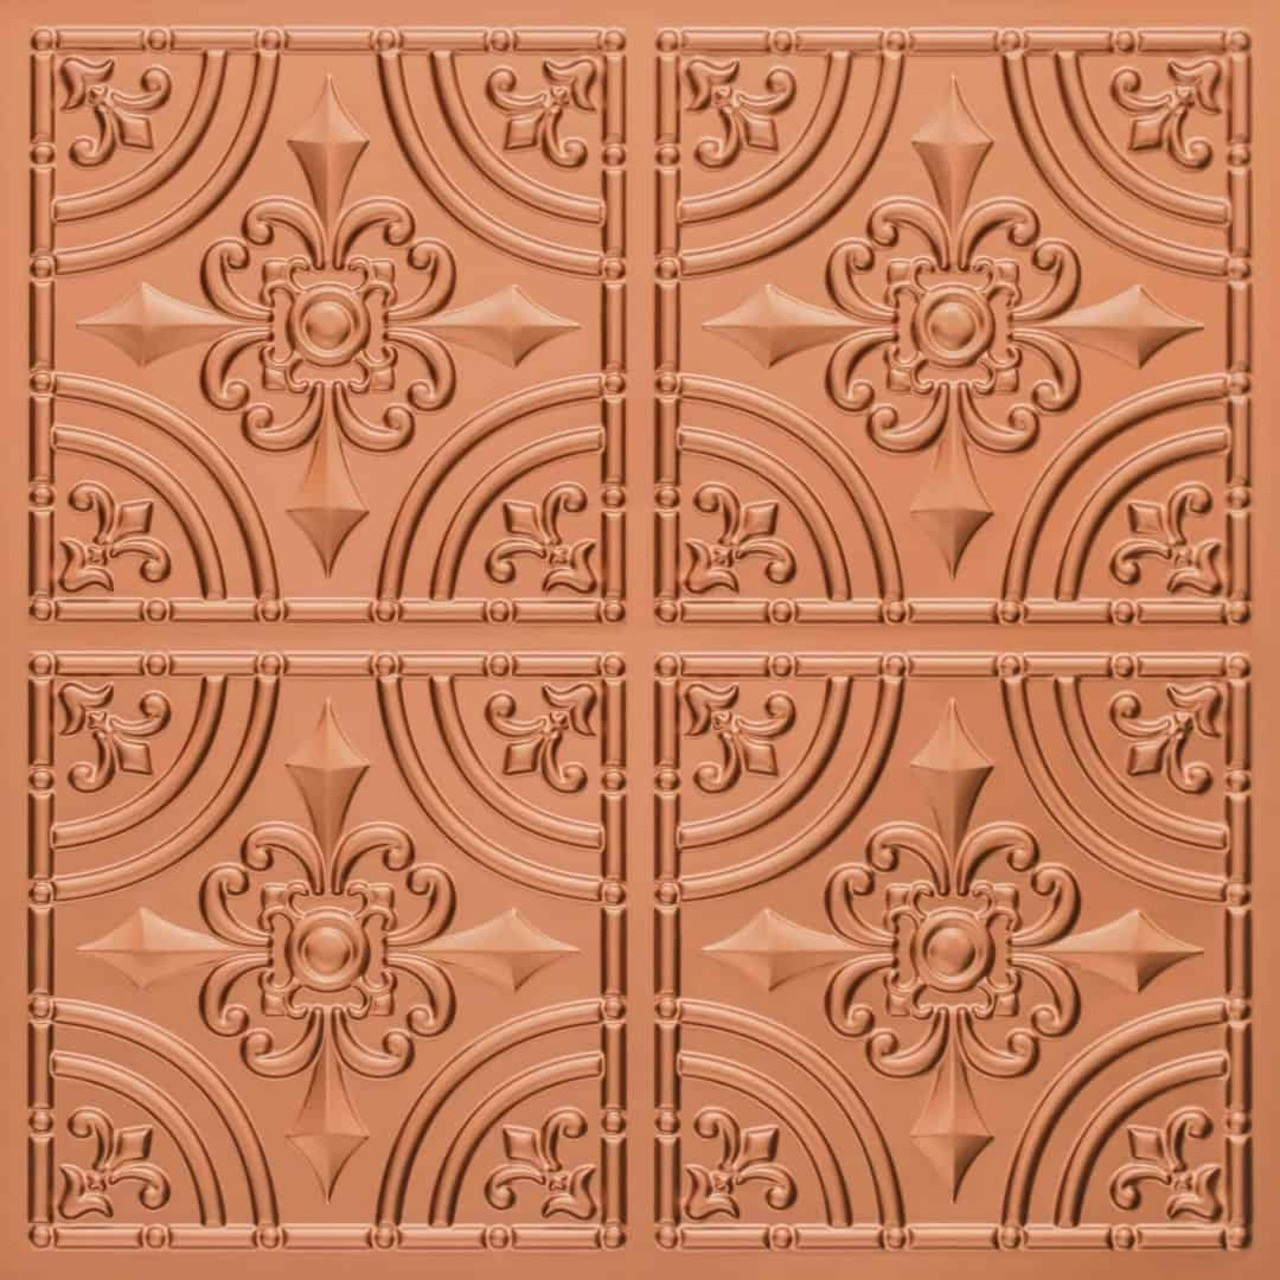 Wrougth Iron - Faux Tin Ceiling Tile - Glue up - 24 in x 24 in - #205 -  Pack of 25 / 100 sqft